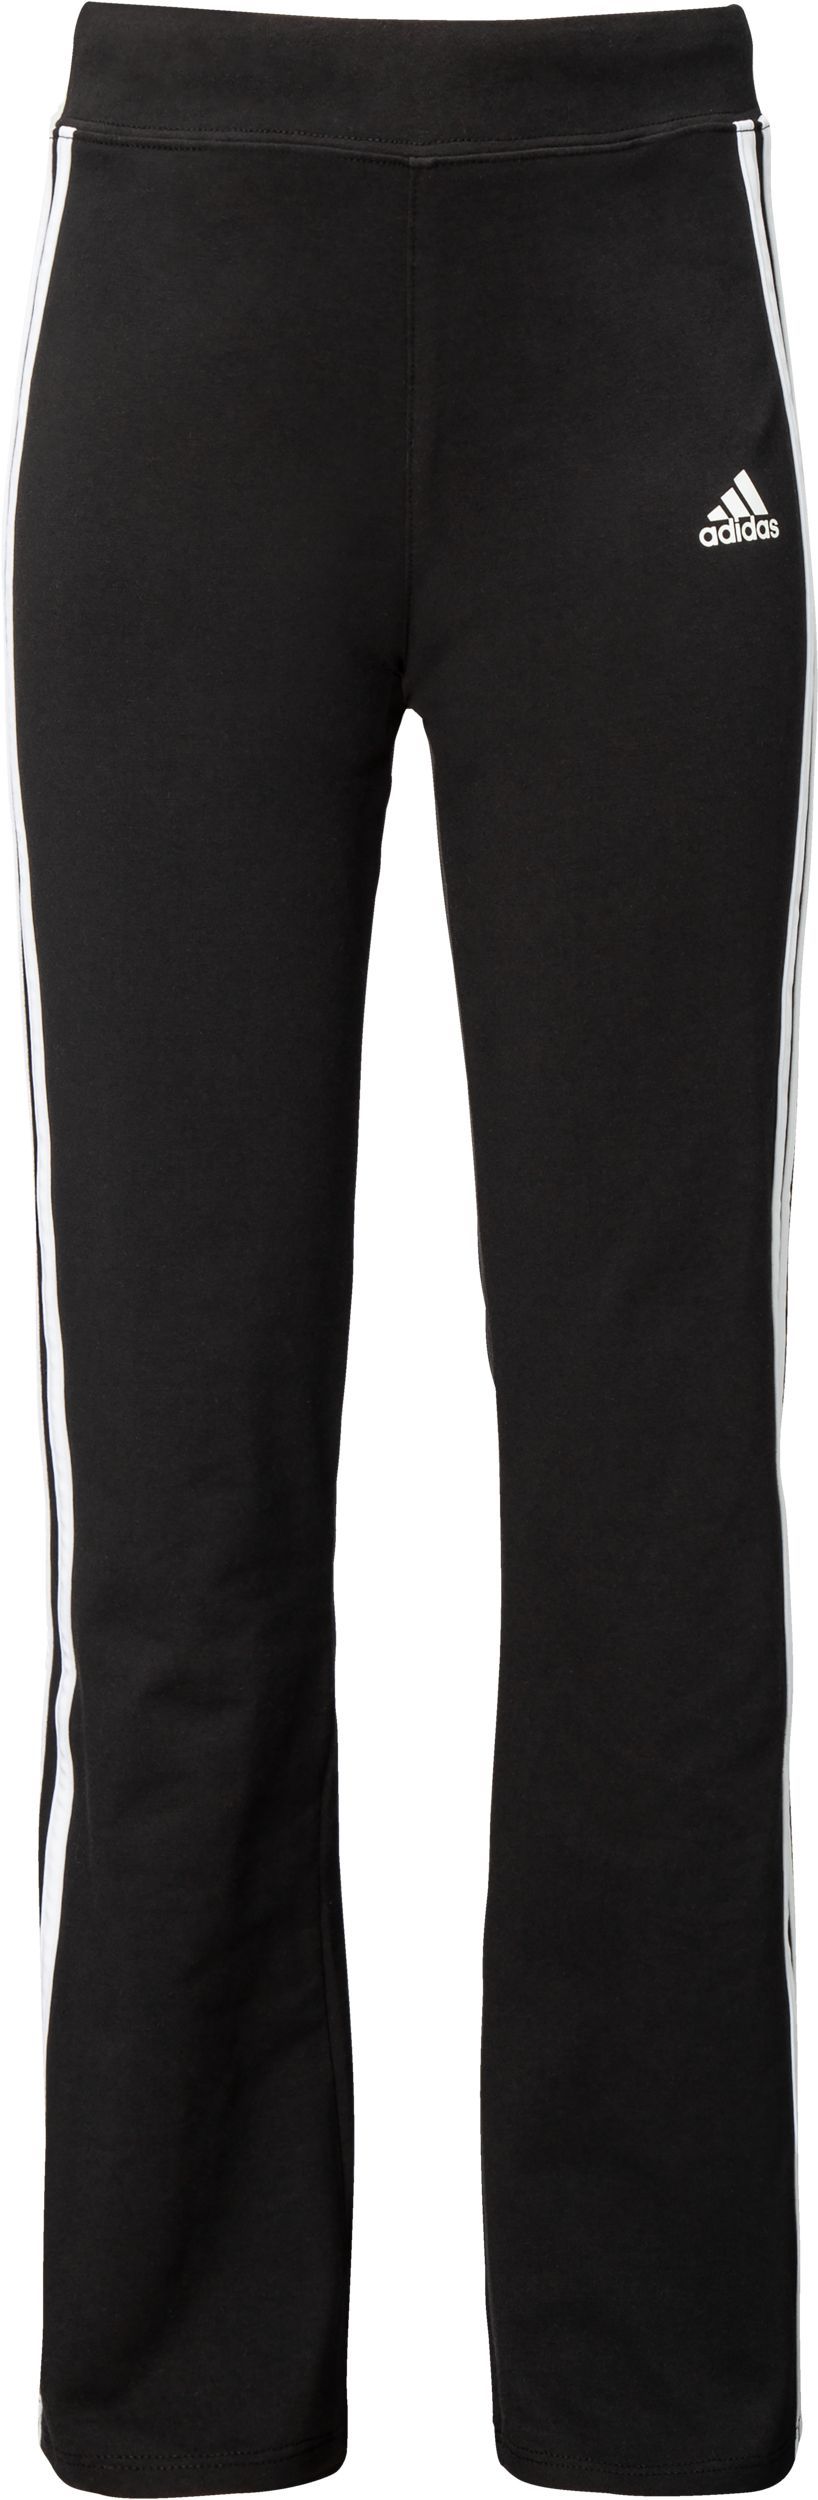 https://media-www.sportchek.ca/product/div-03-softgoods/dpt-72-casual-clothing/sdpt-04-girls/333623502/adidas-3s-flare-pant-blk-white-q122--cb28d6a2-569a-48a5-b055-69bc52446d65-jpgrendition.jpg